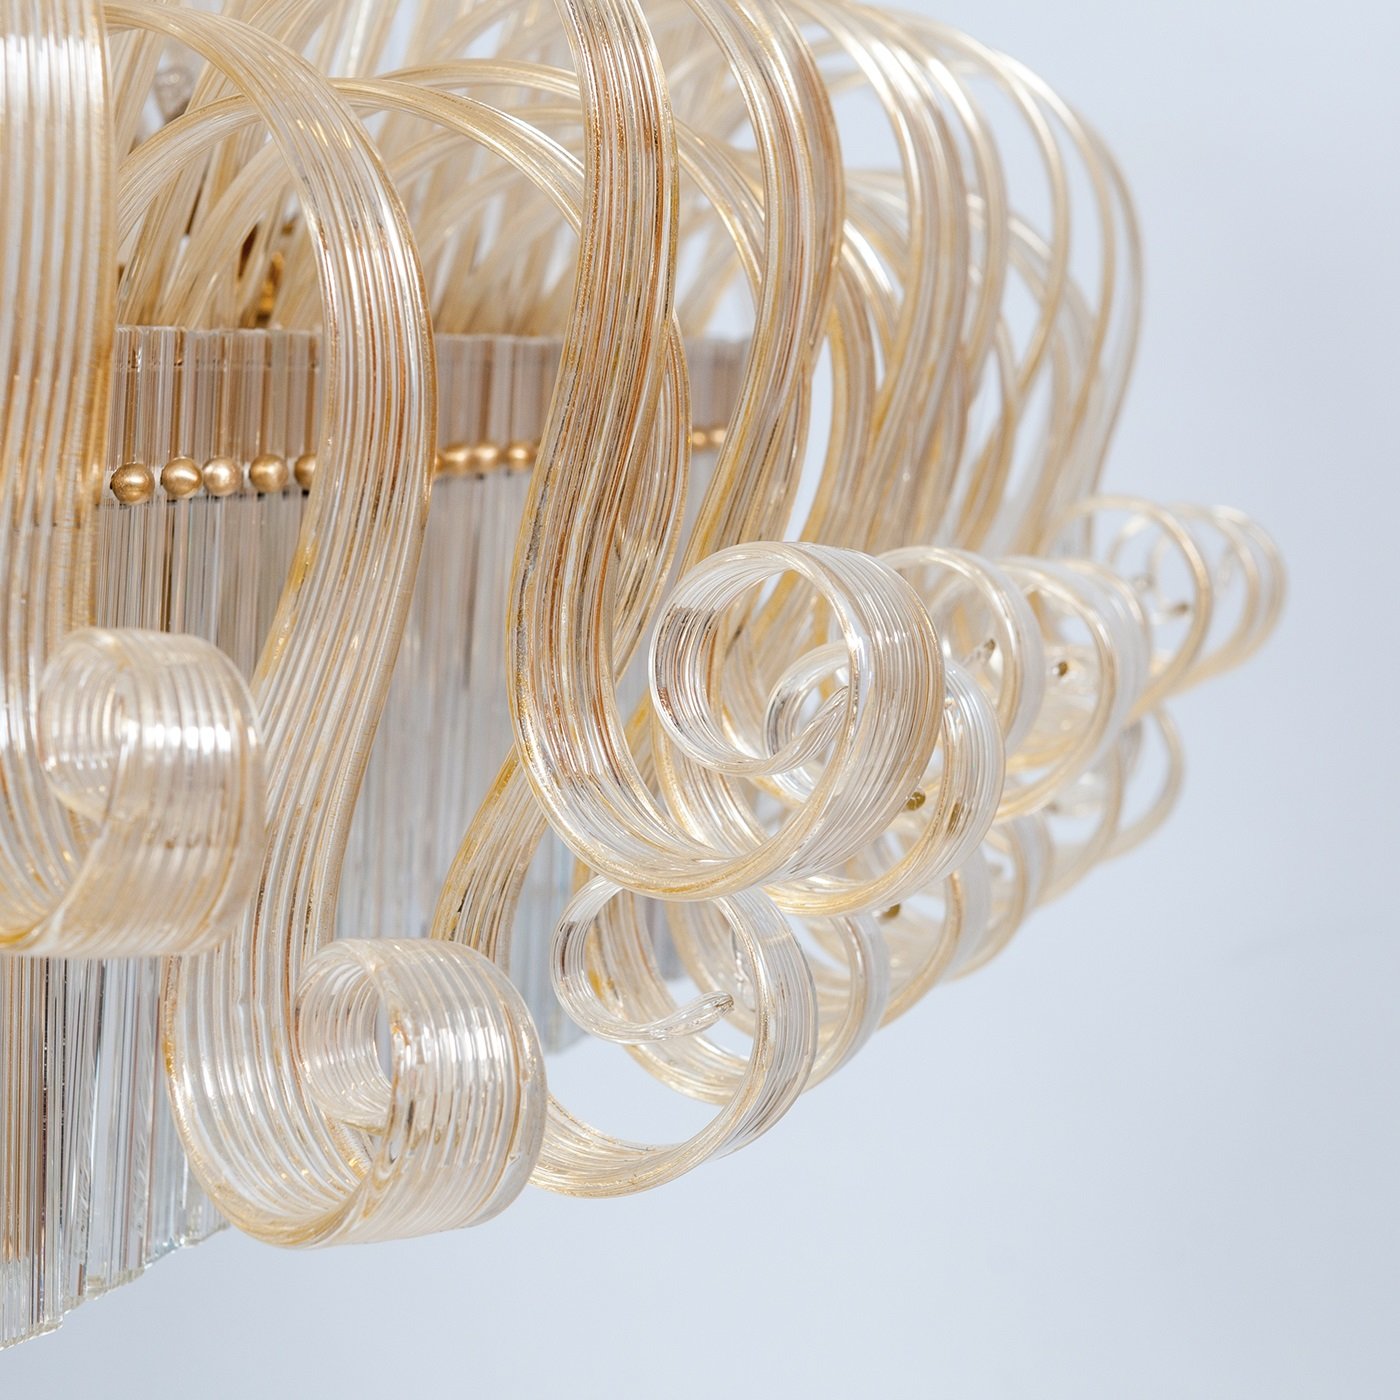 Limited Edition Italian Chandelier with 24K Gold - Alternative view 5